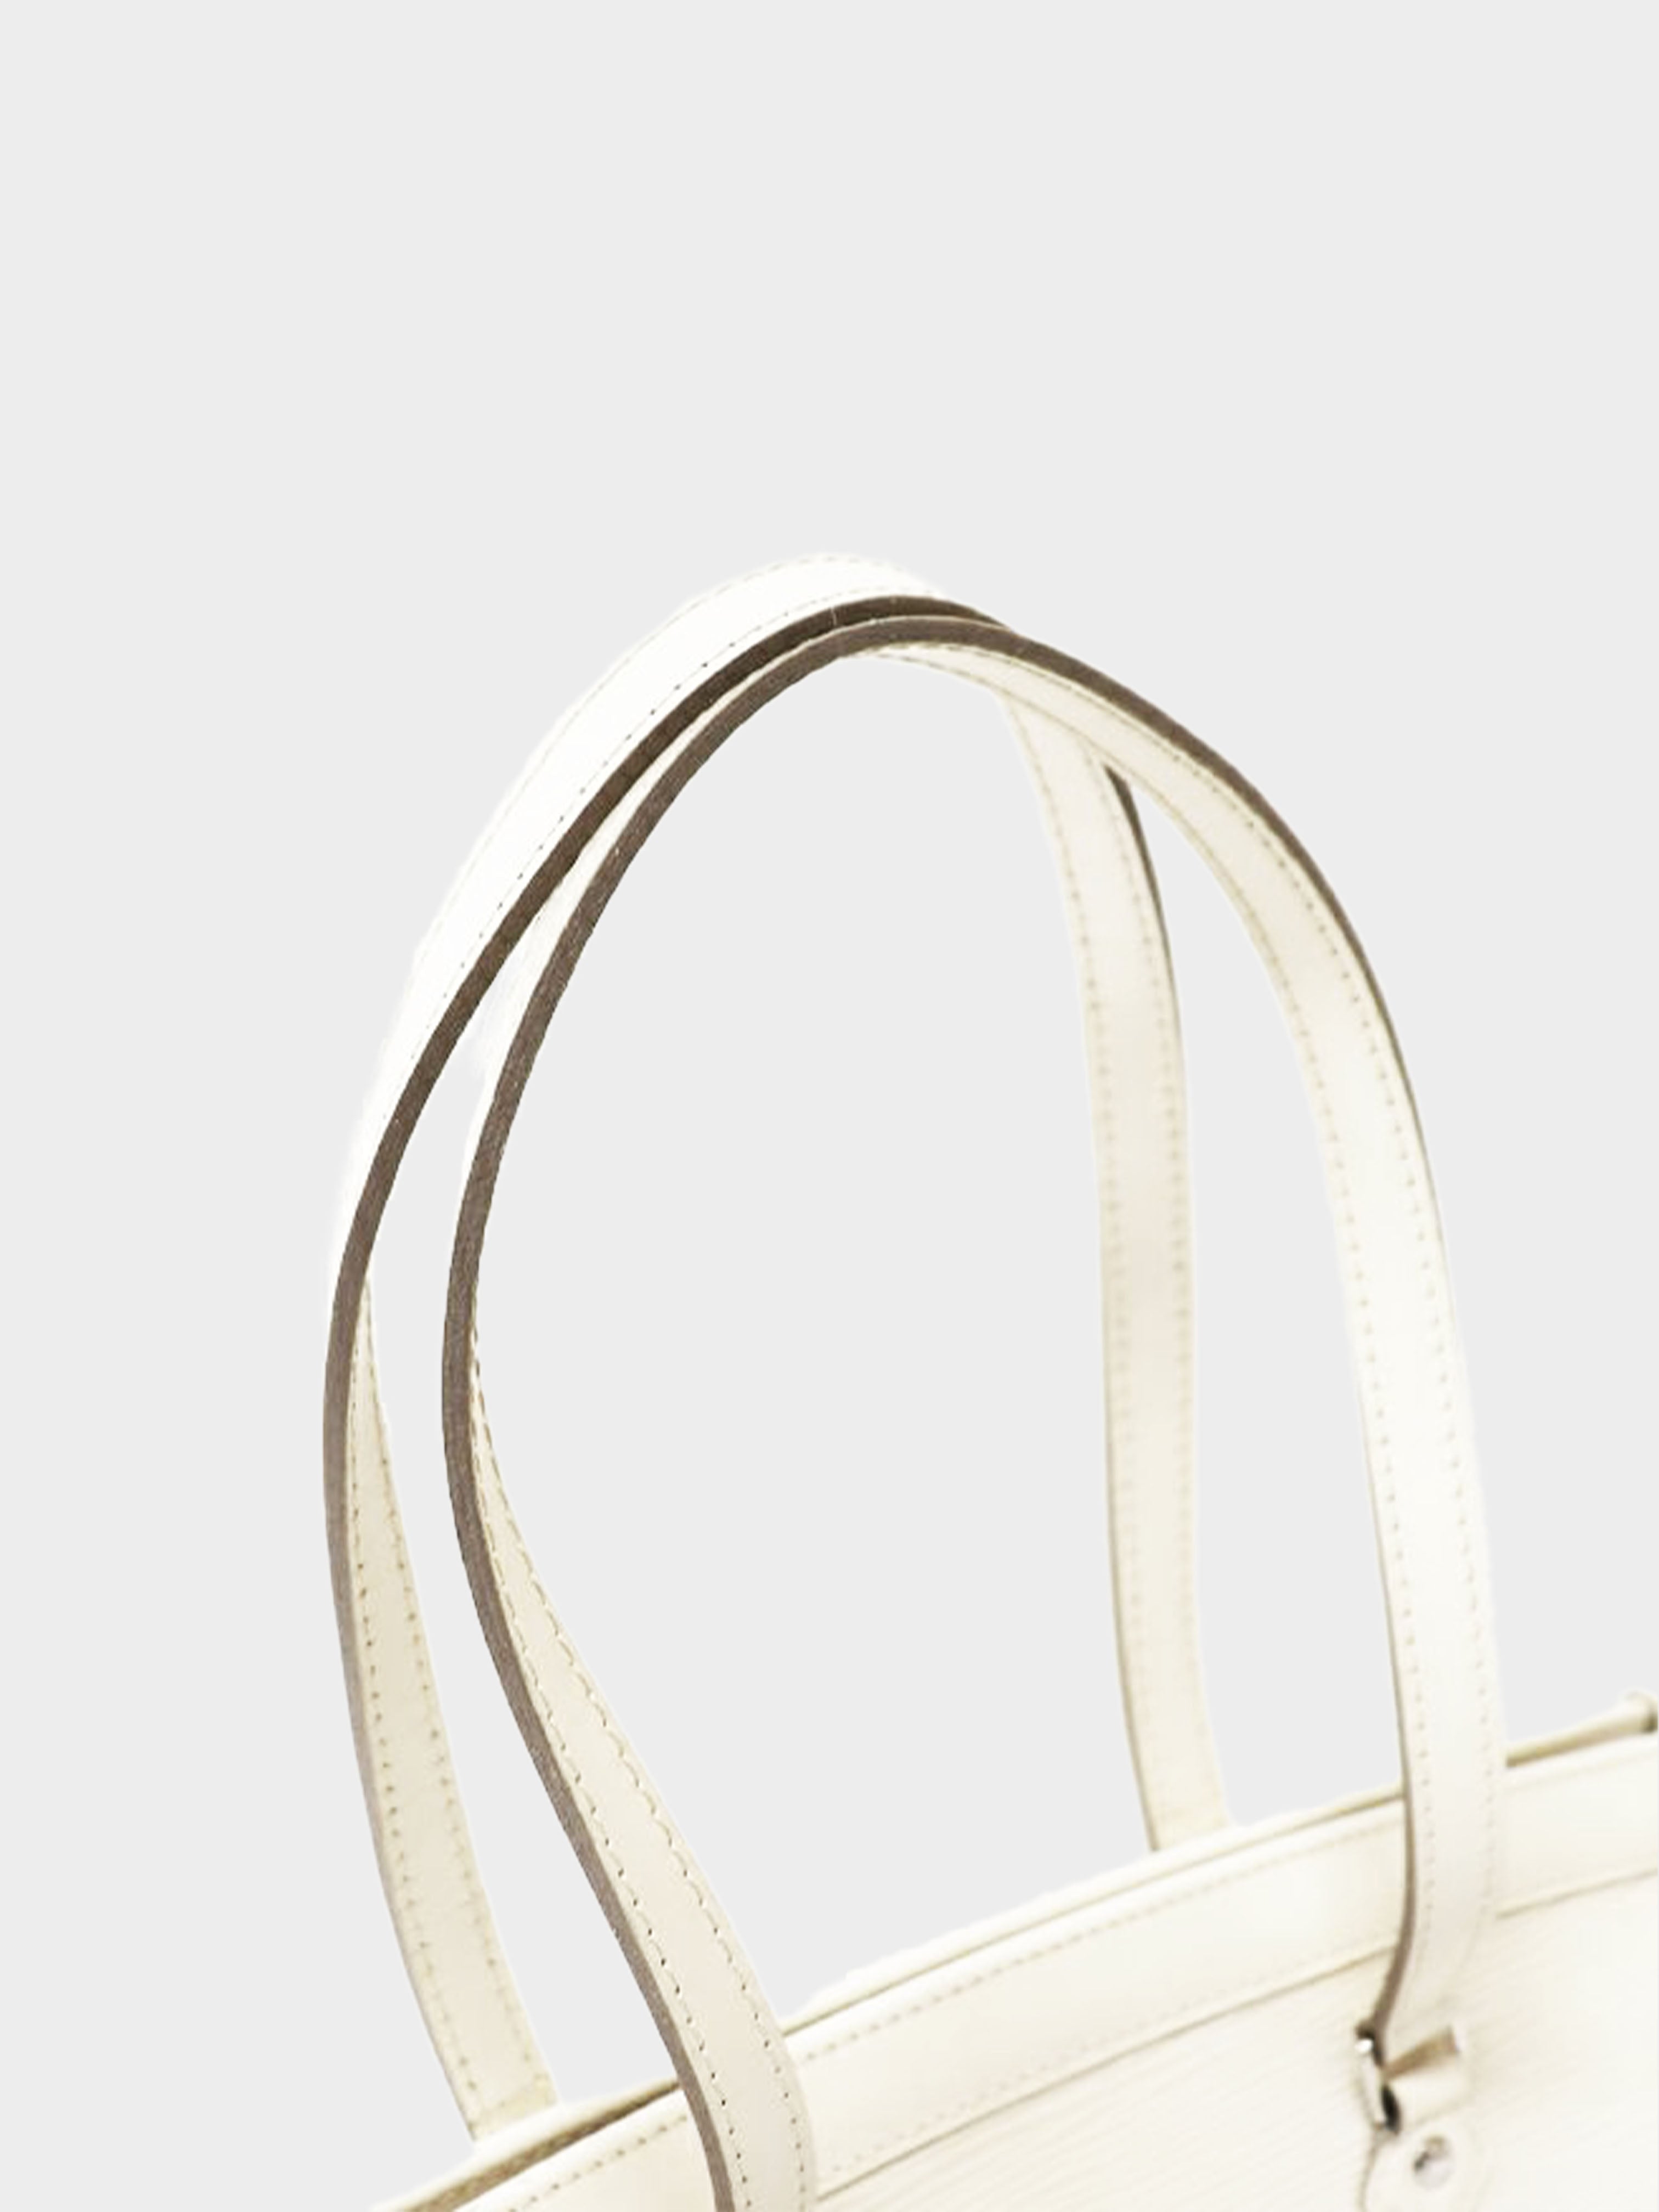 Louis Vuitton Ivory Epi Leather Madeleine PM Bag For Sale at